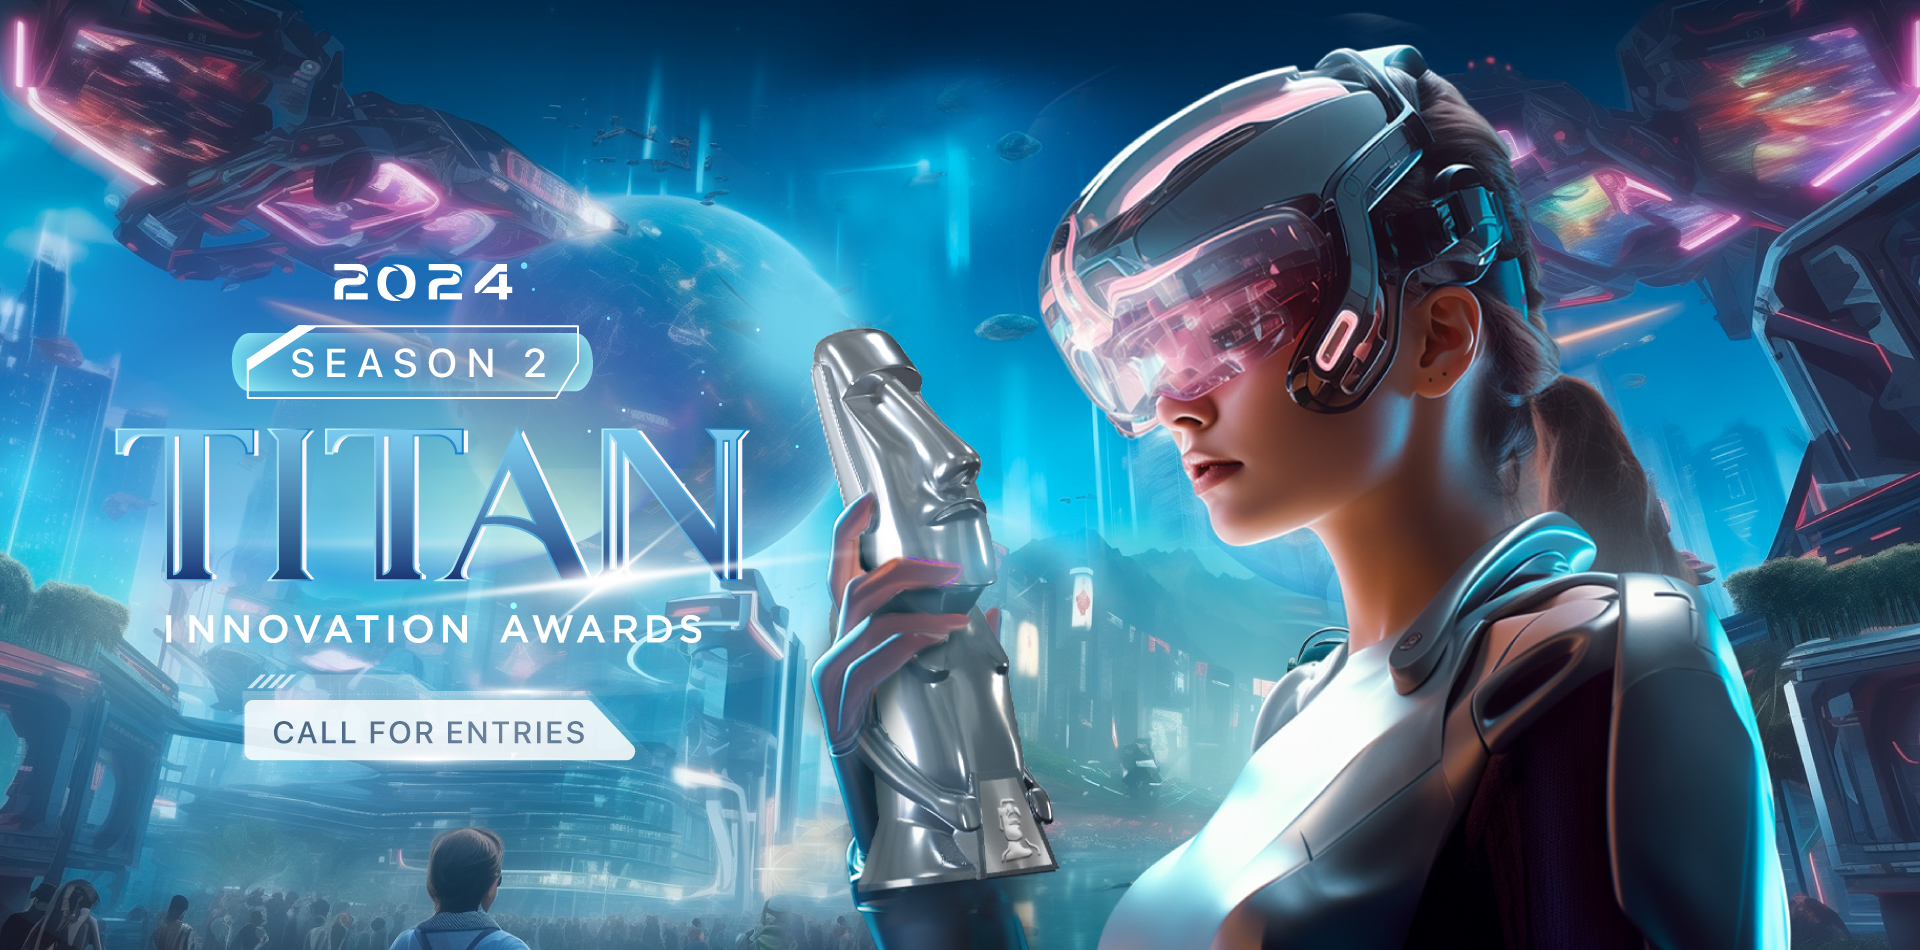 S2 Calling for Entries | 2024 TITAN Innovation Awards